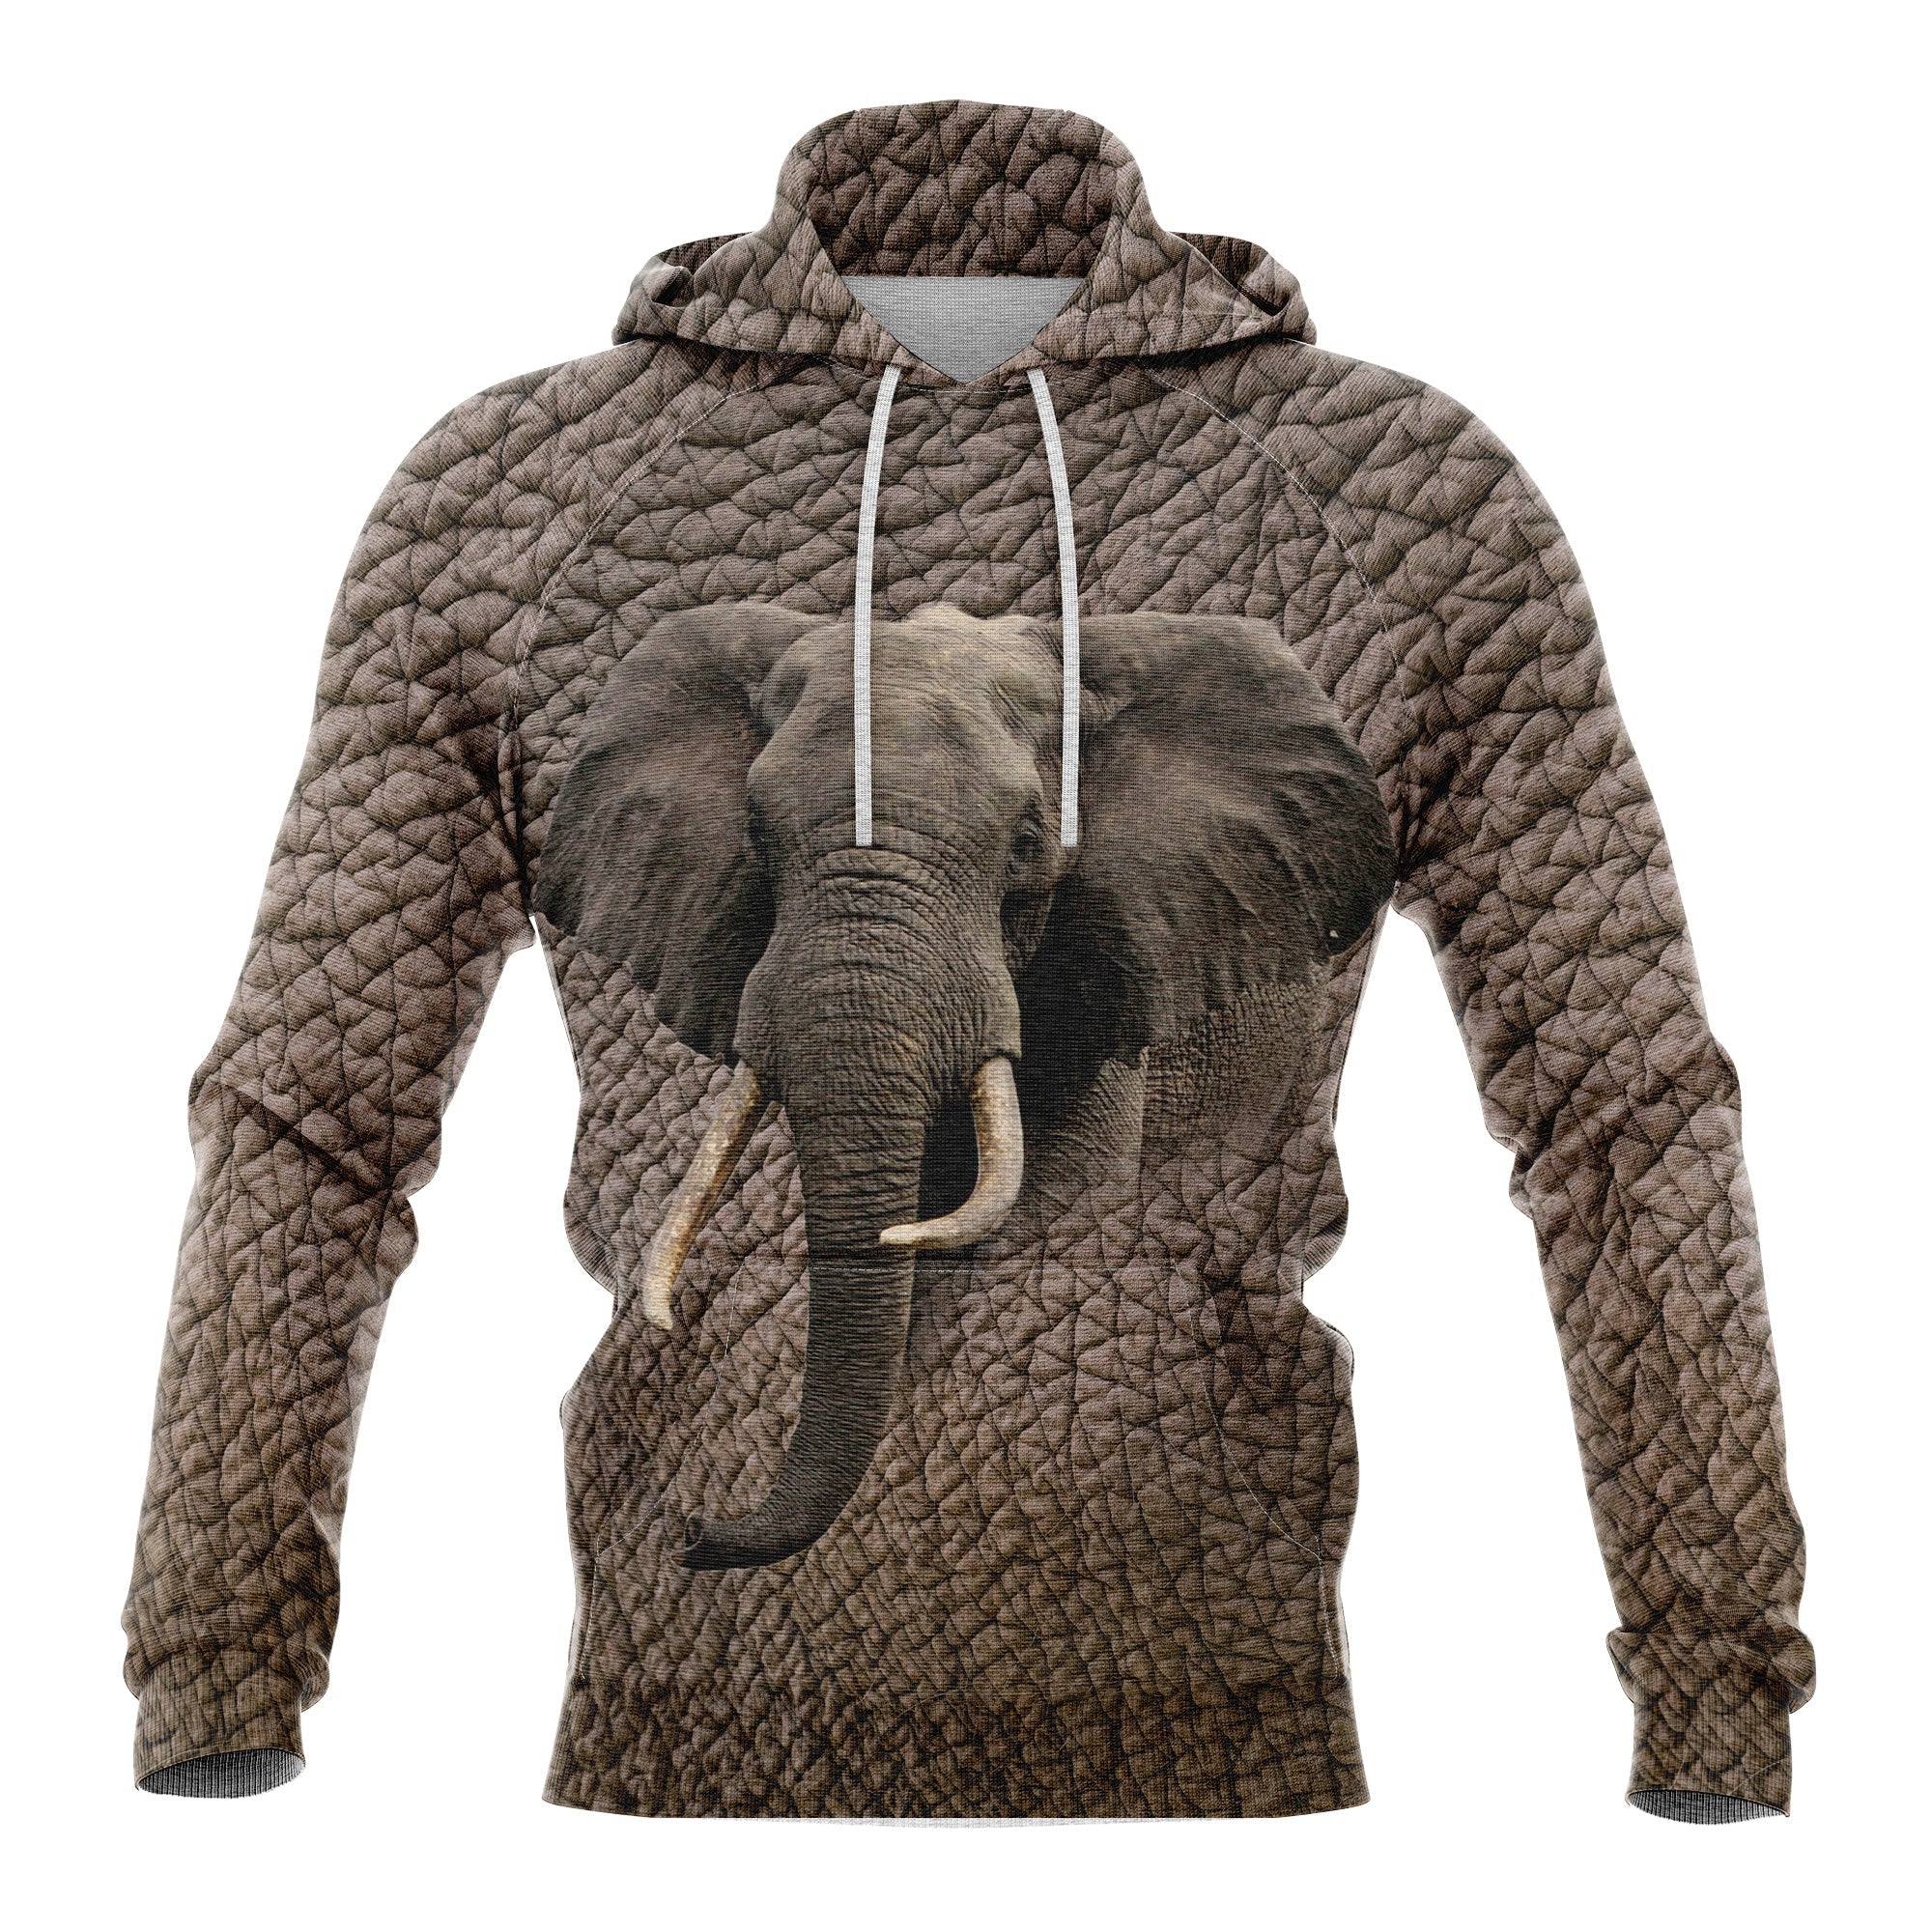 Amazing Elephant All Over Print Hoodie For Men And Women